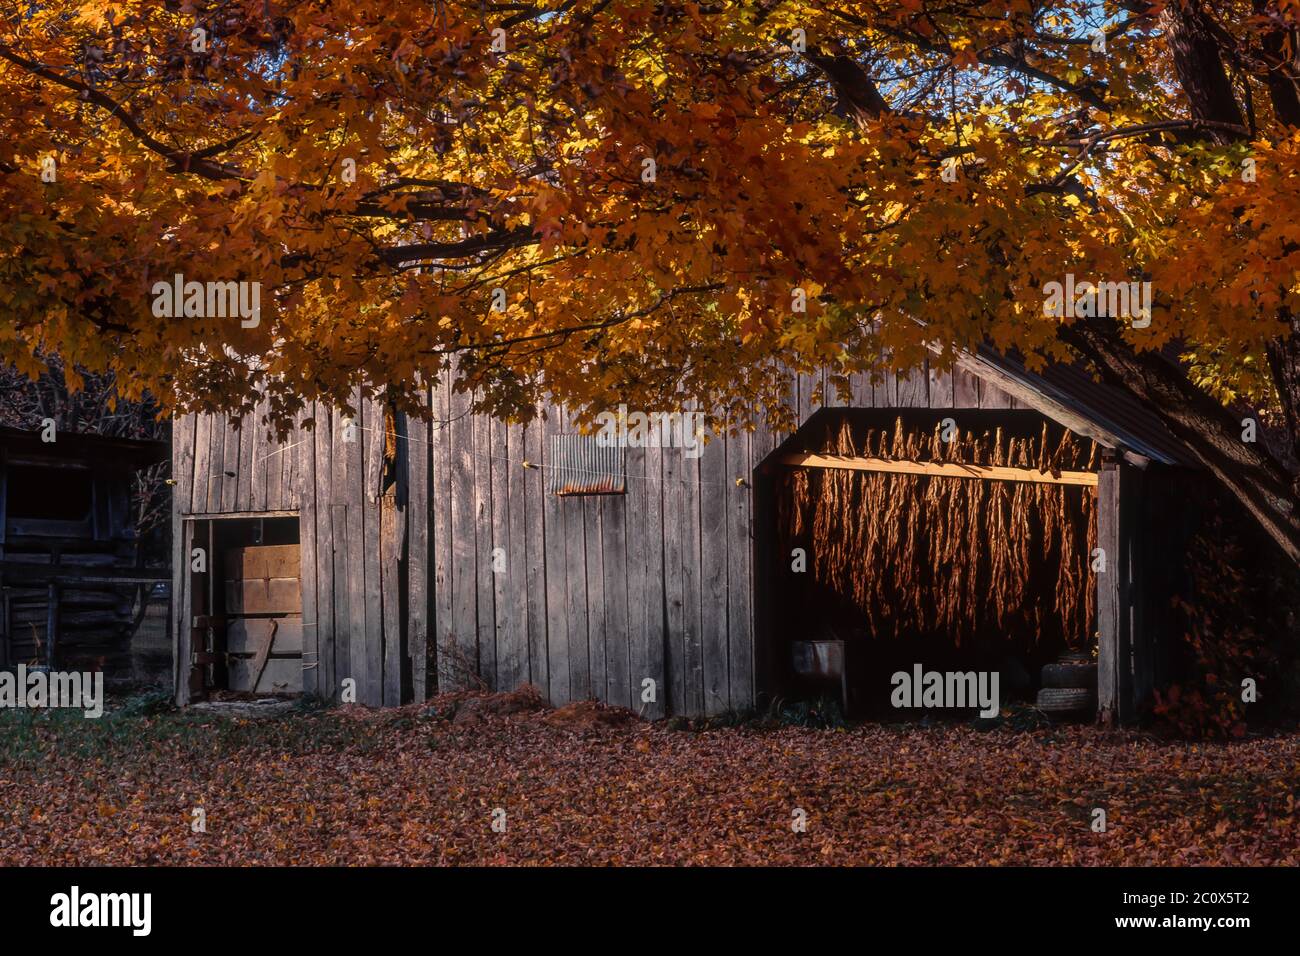 Burley tobacco curing in an open barn in Brown County, Indiana, USA [No property release; available for editorial licensing only] Stock Photo